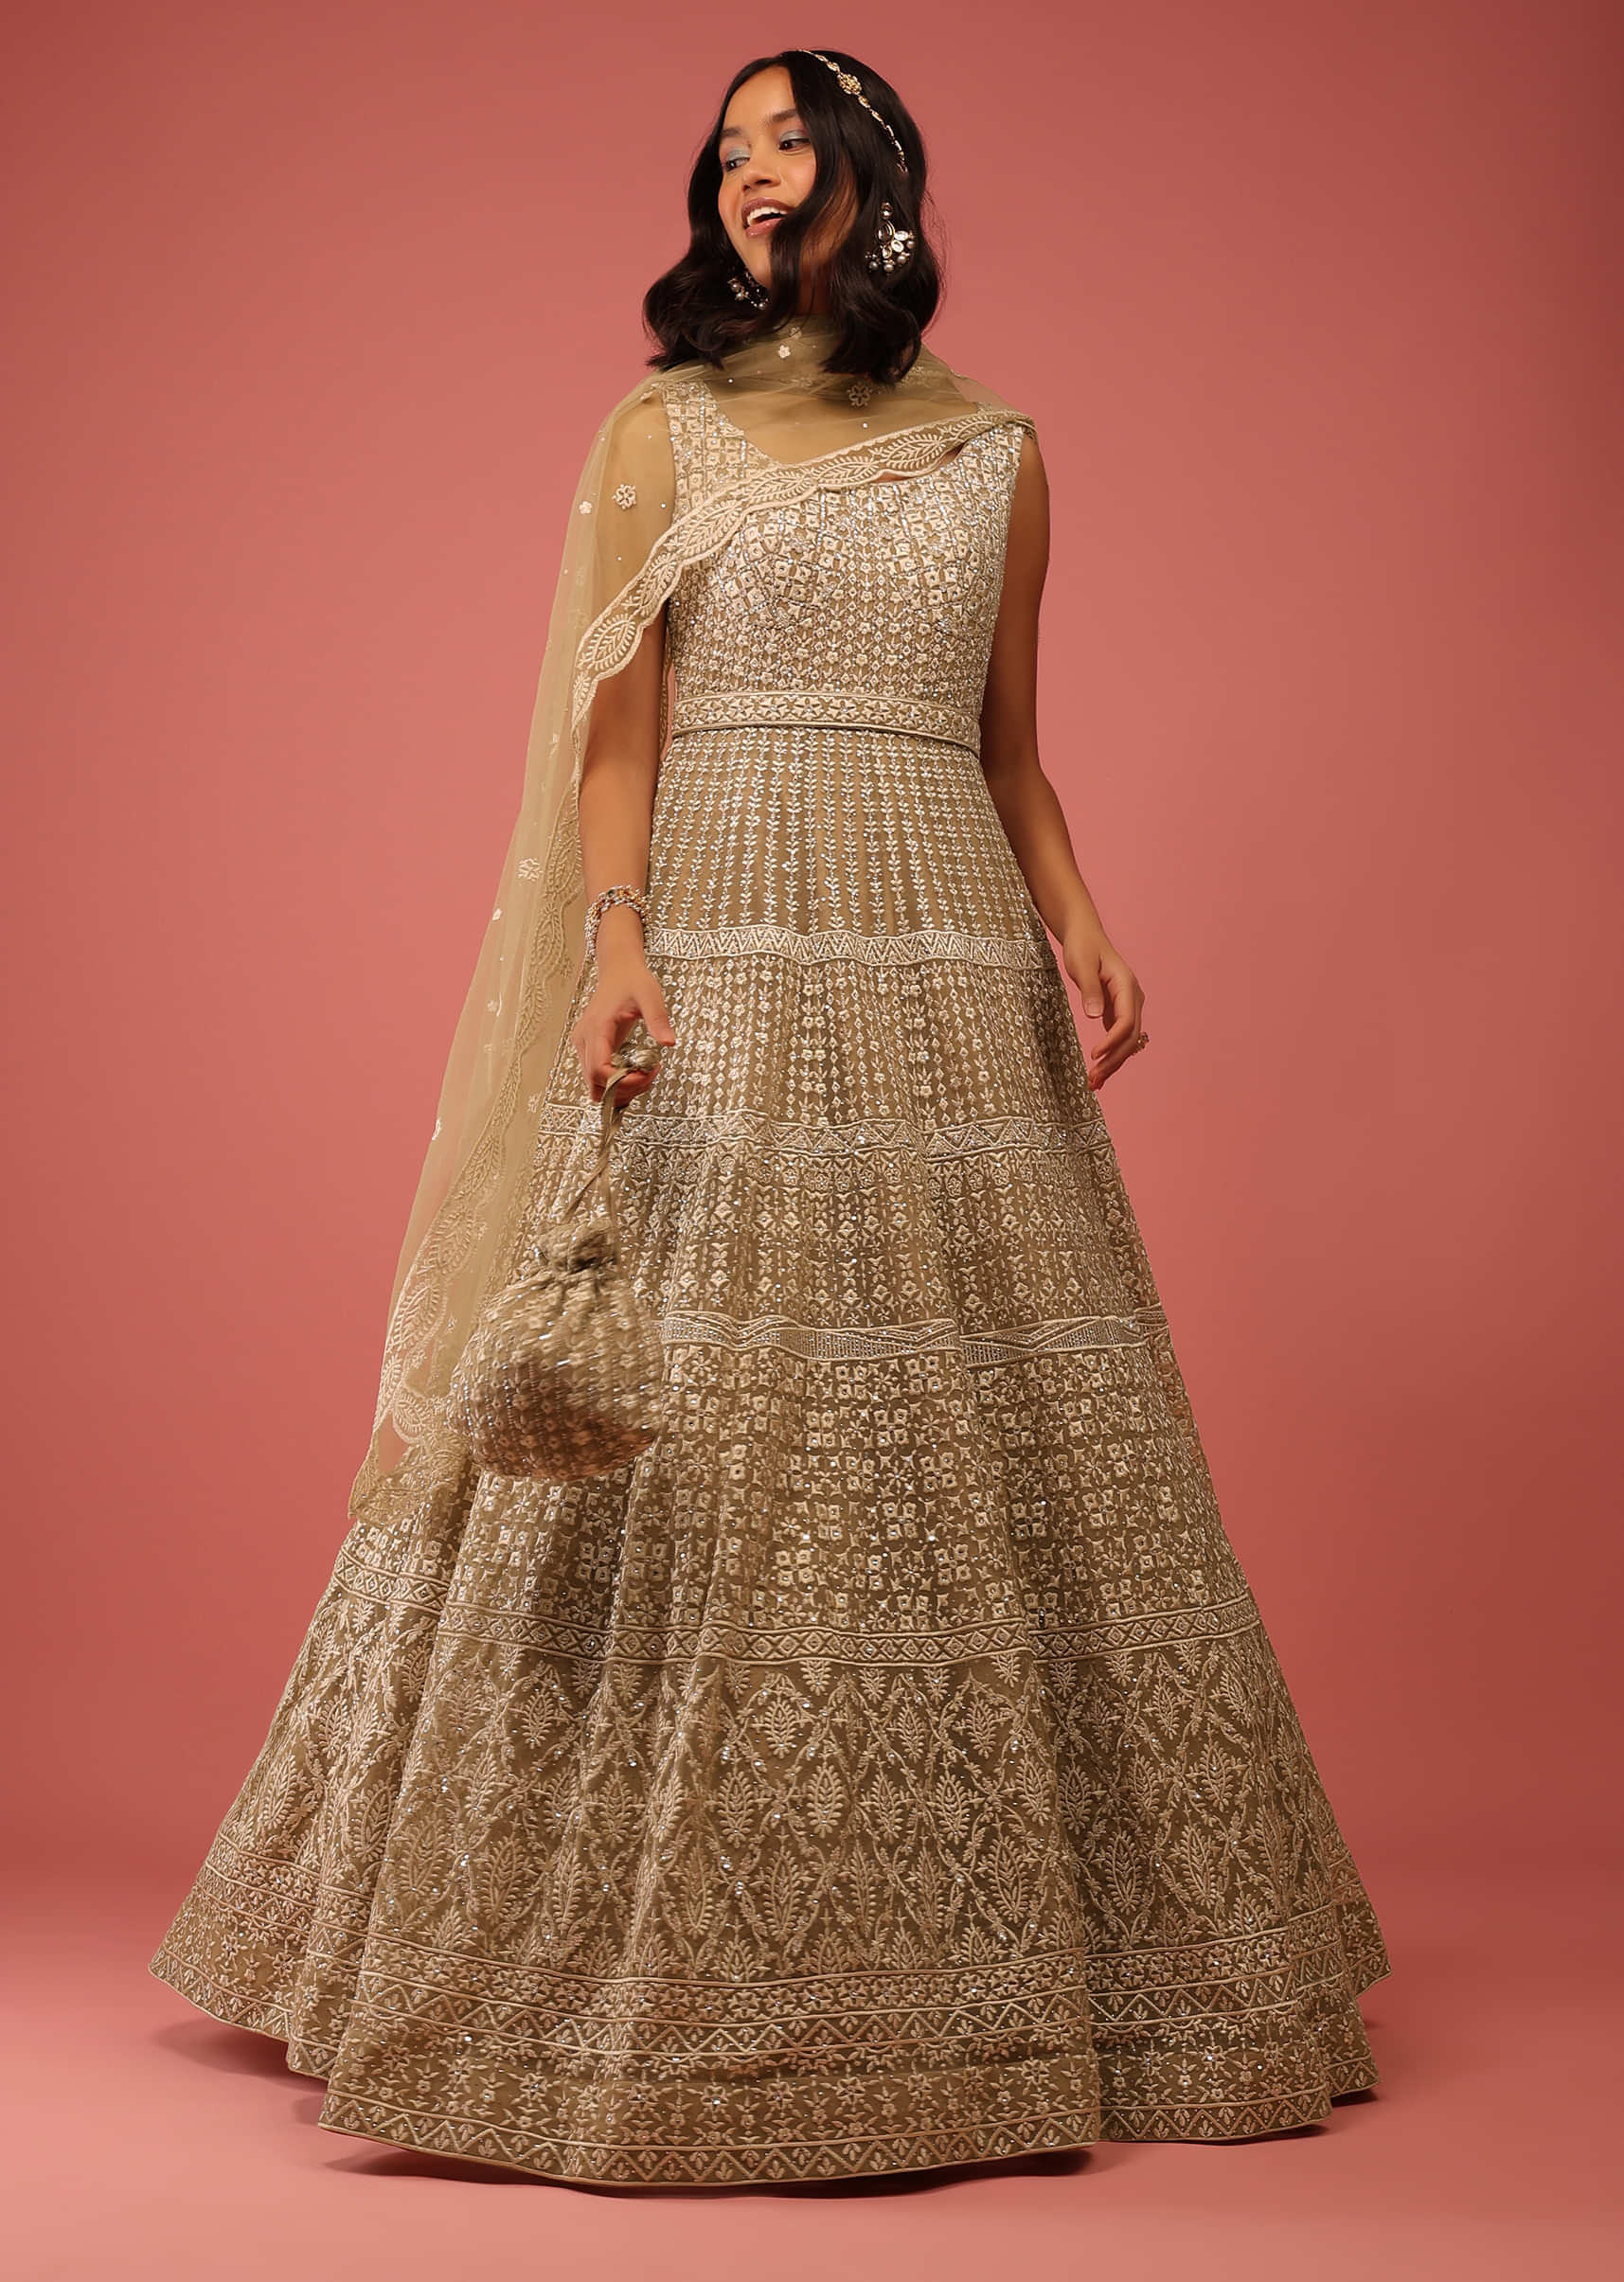 Hazel Beige Anarkali Suit In Net With Resham Embroidery All Over Along With Mirror Accents